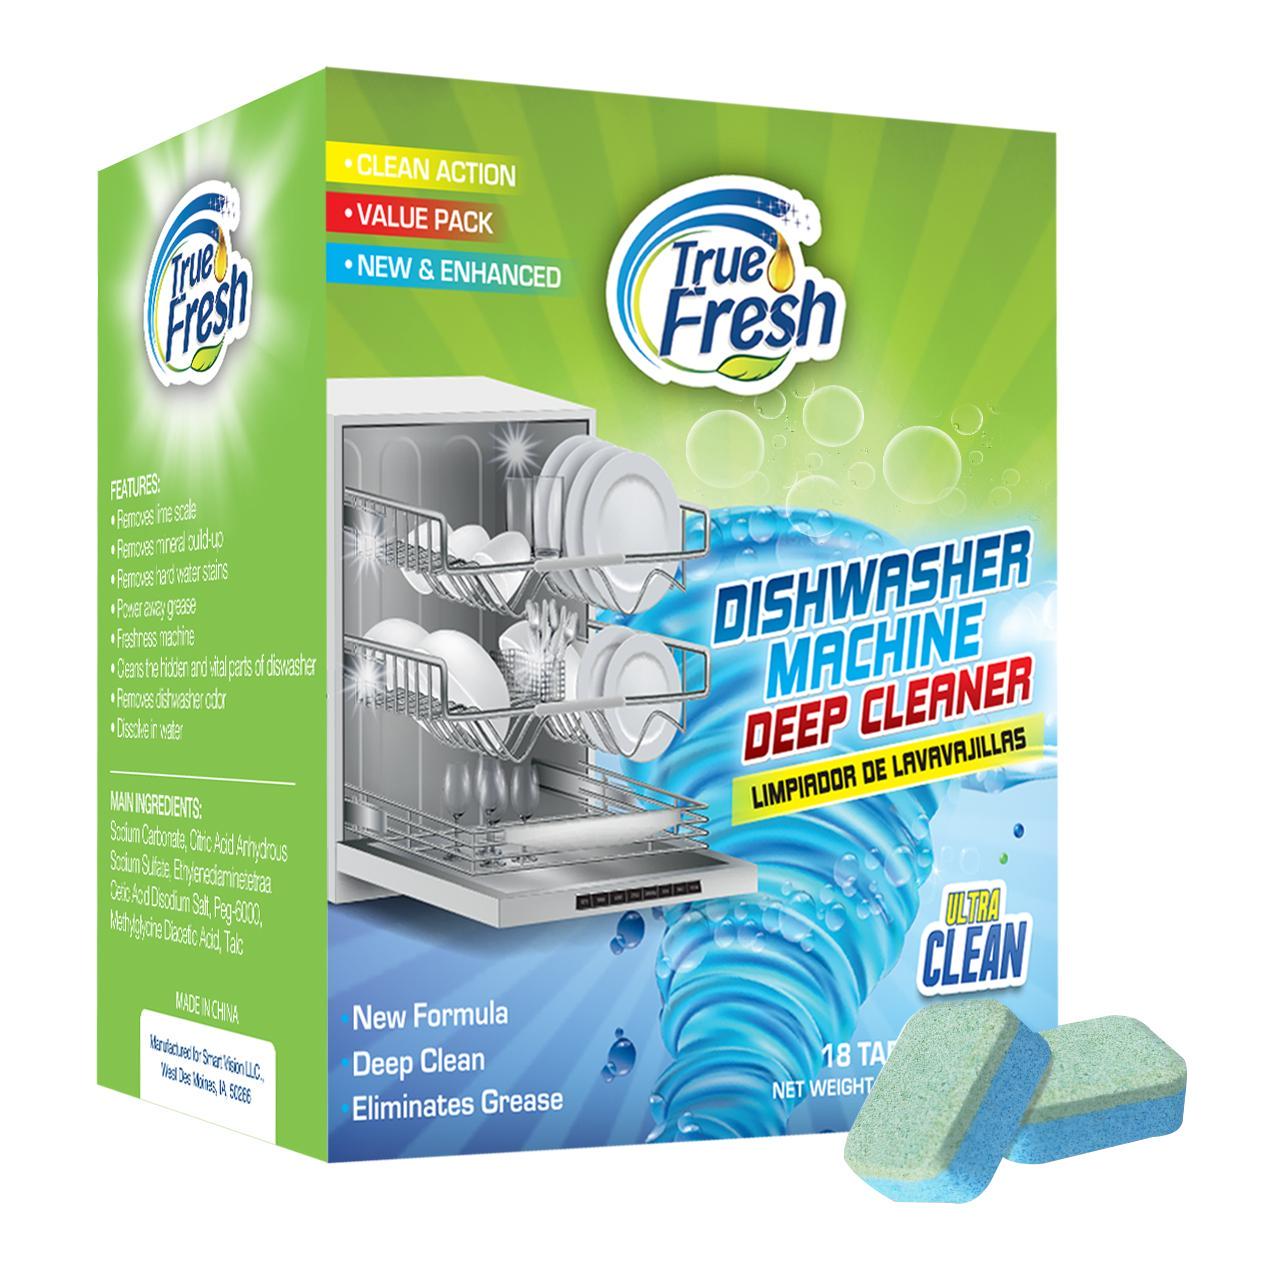 Dishwasher filter cleaning - An out-and-out guide to clean a mucky filter of your dishwasher